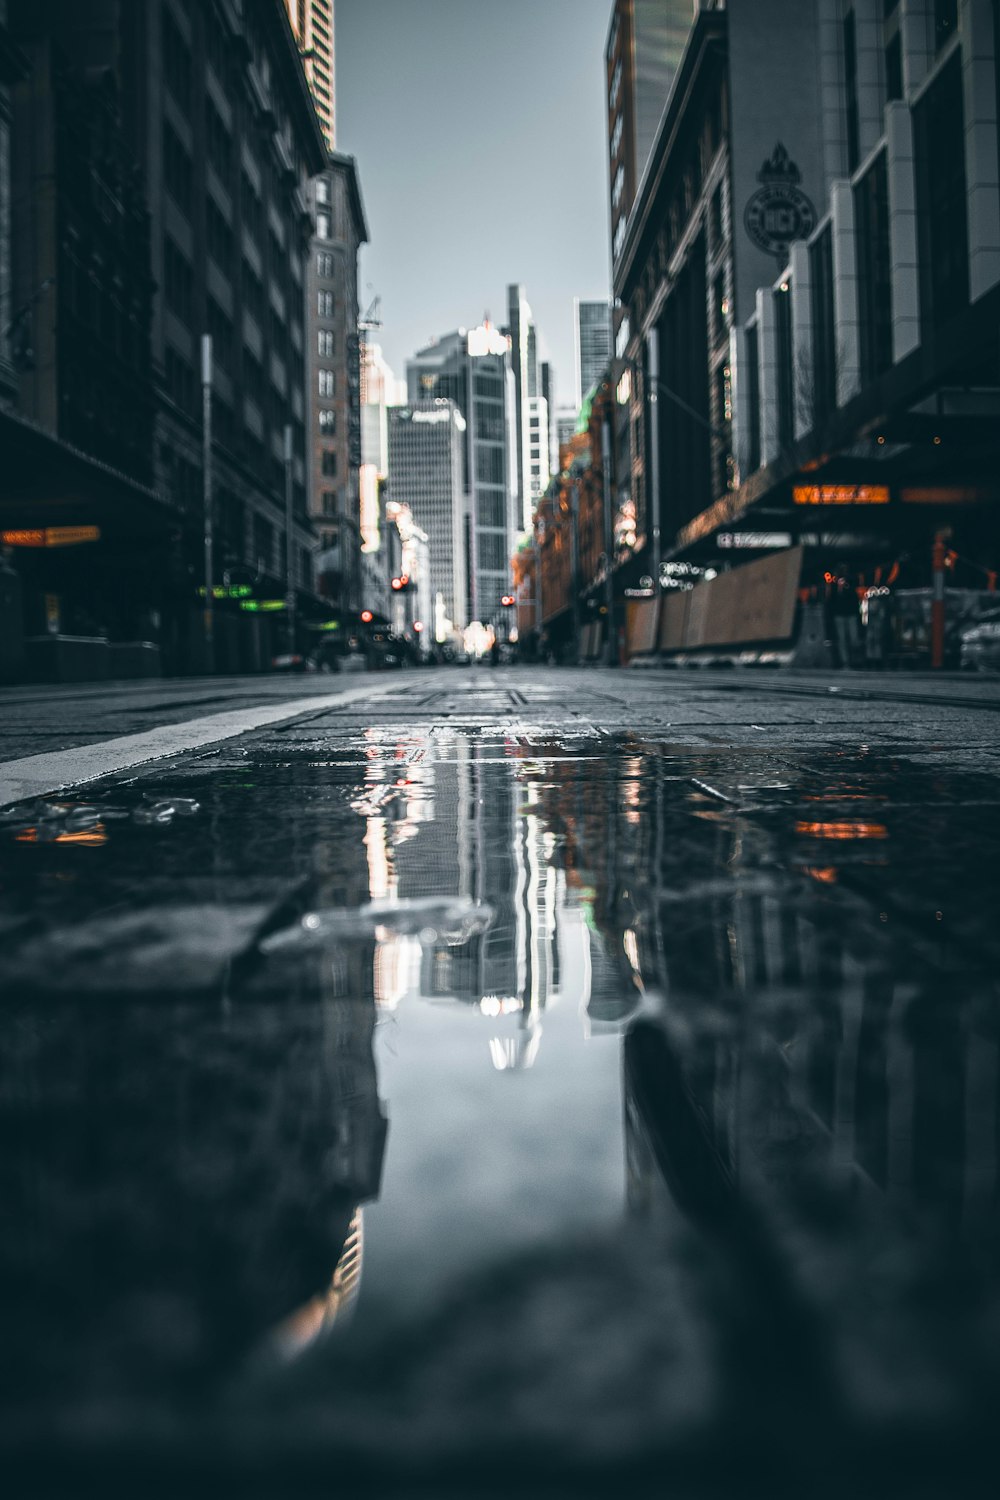 a city street with a puddle of water on the ground